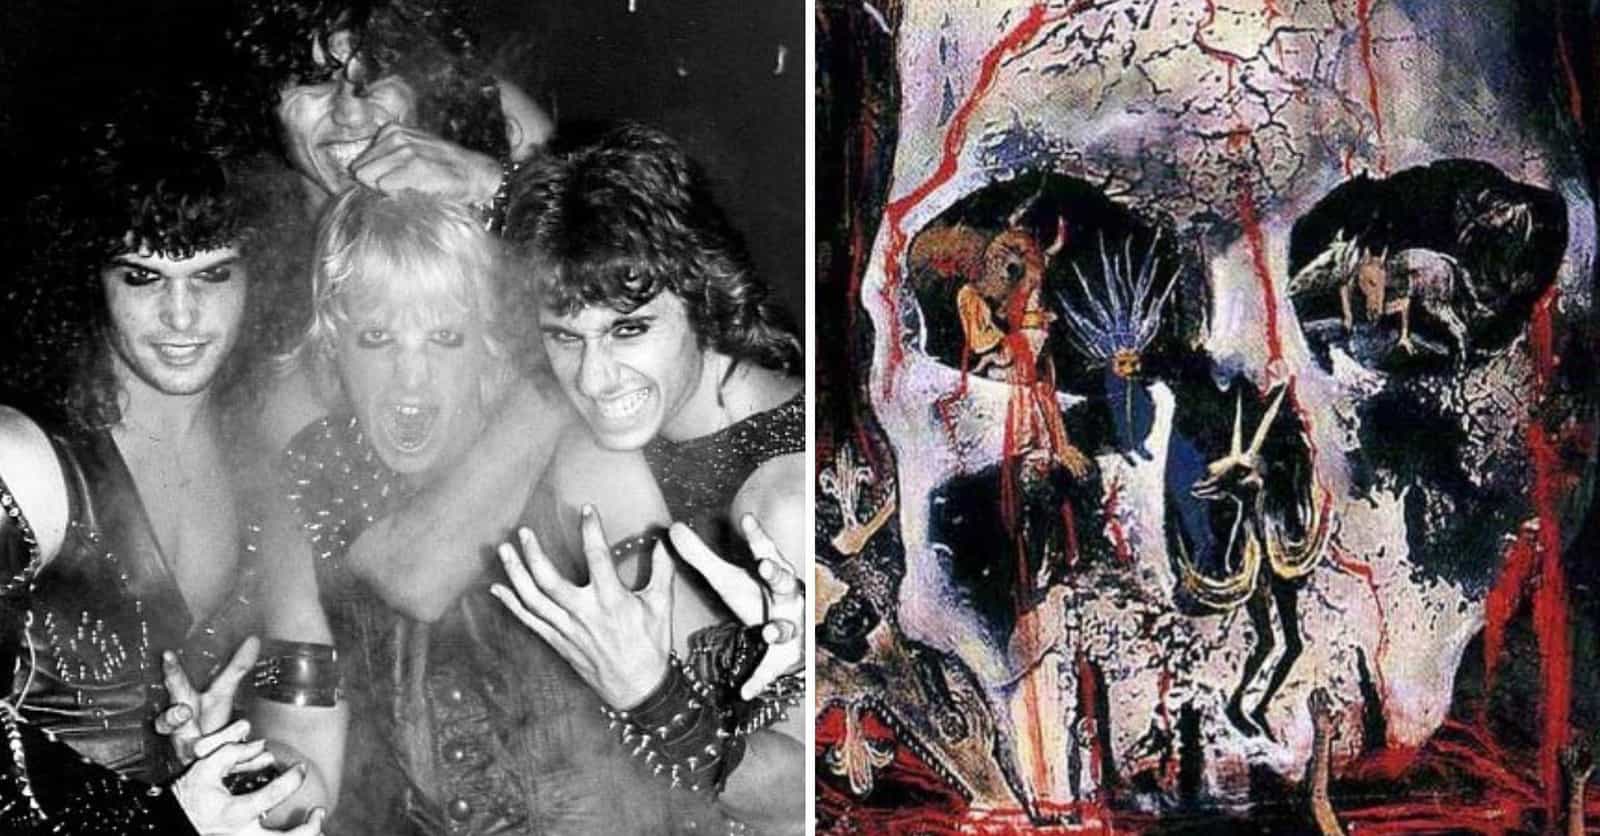 These Crazy Slayer Stories Prove They Are One Of The Most Interesting Bands Ever